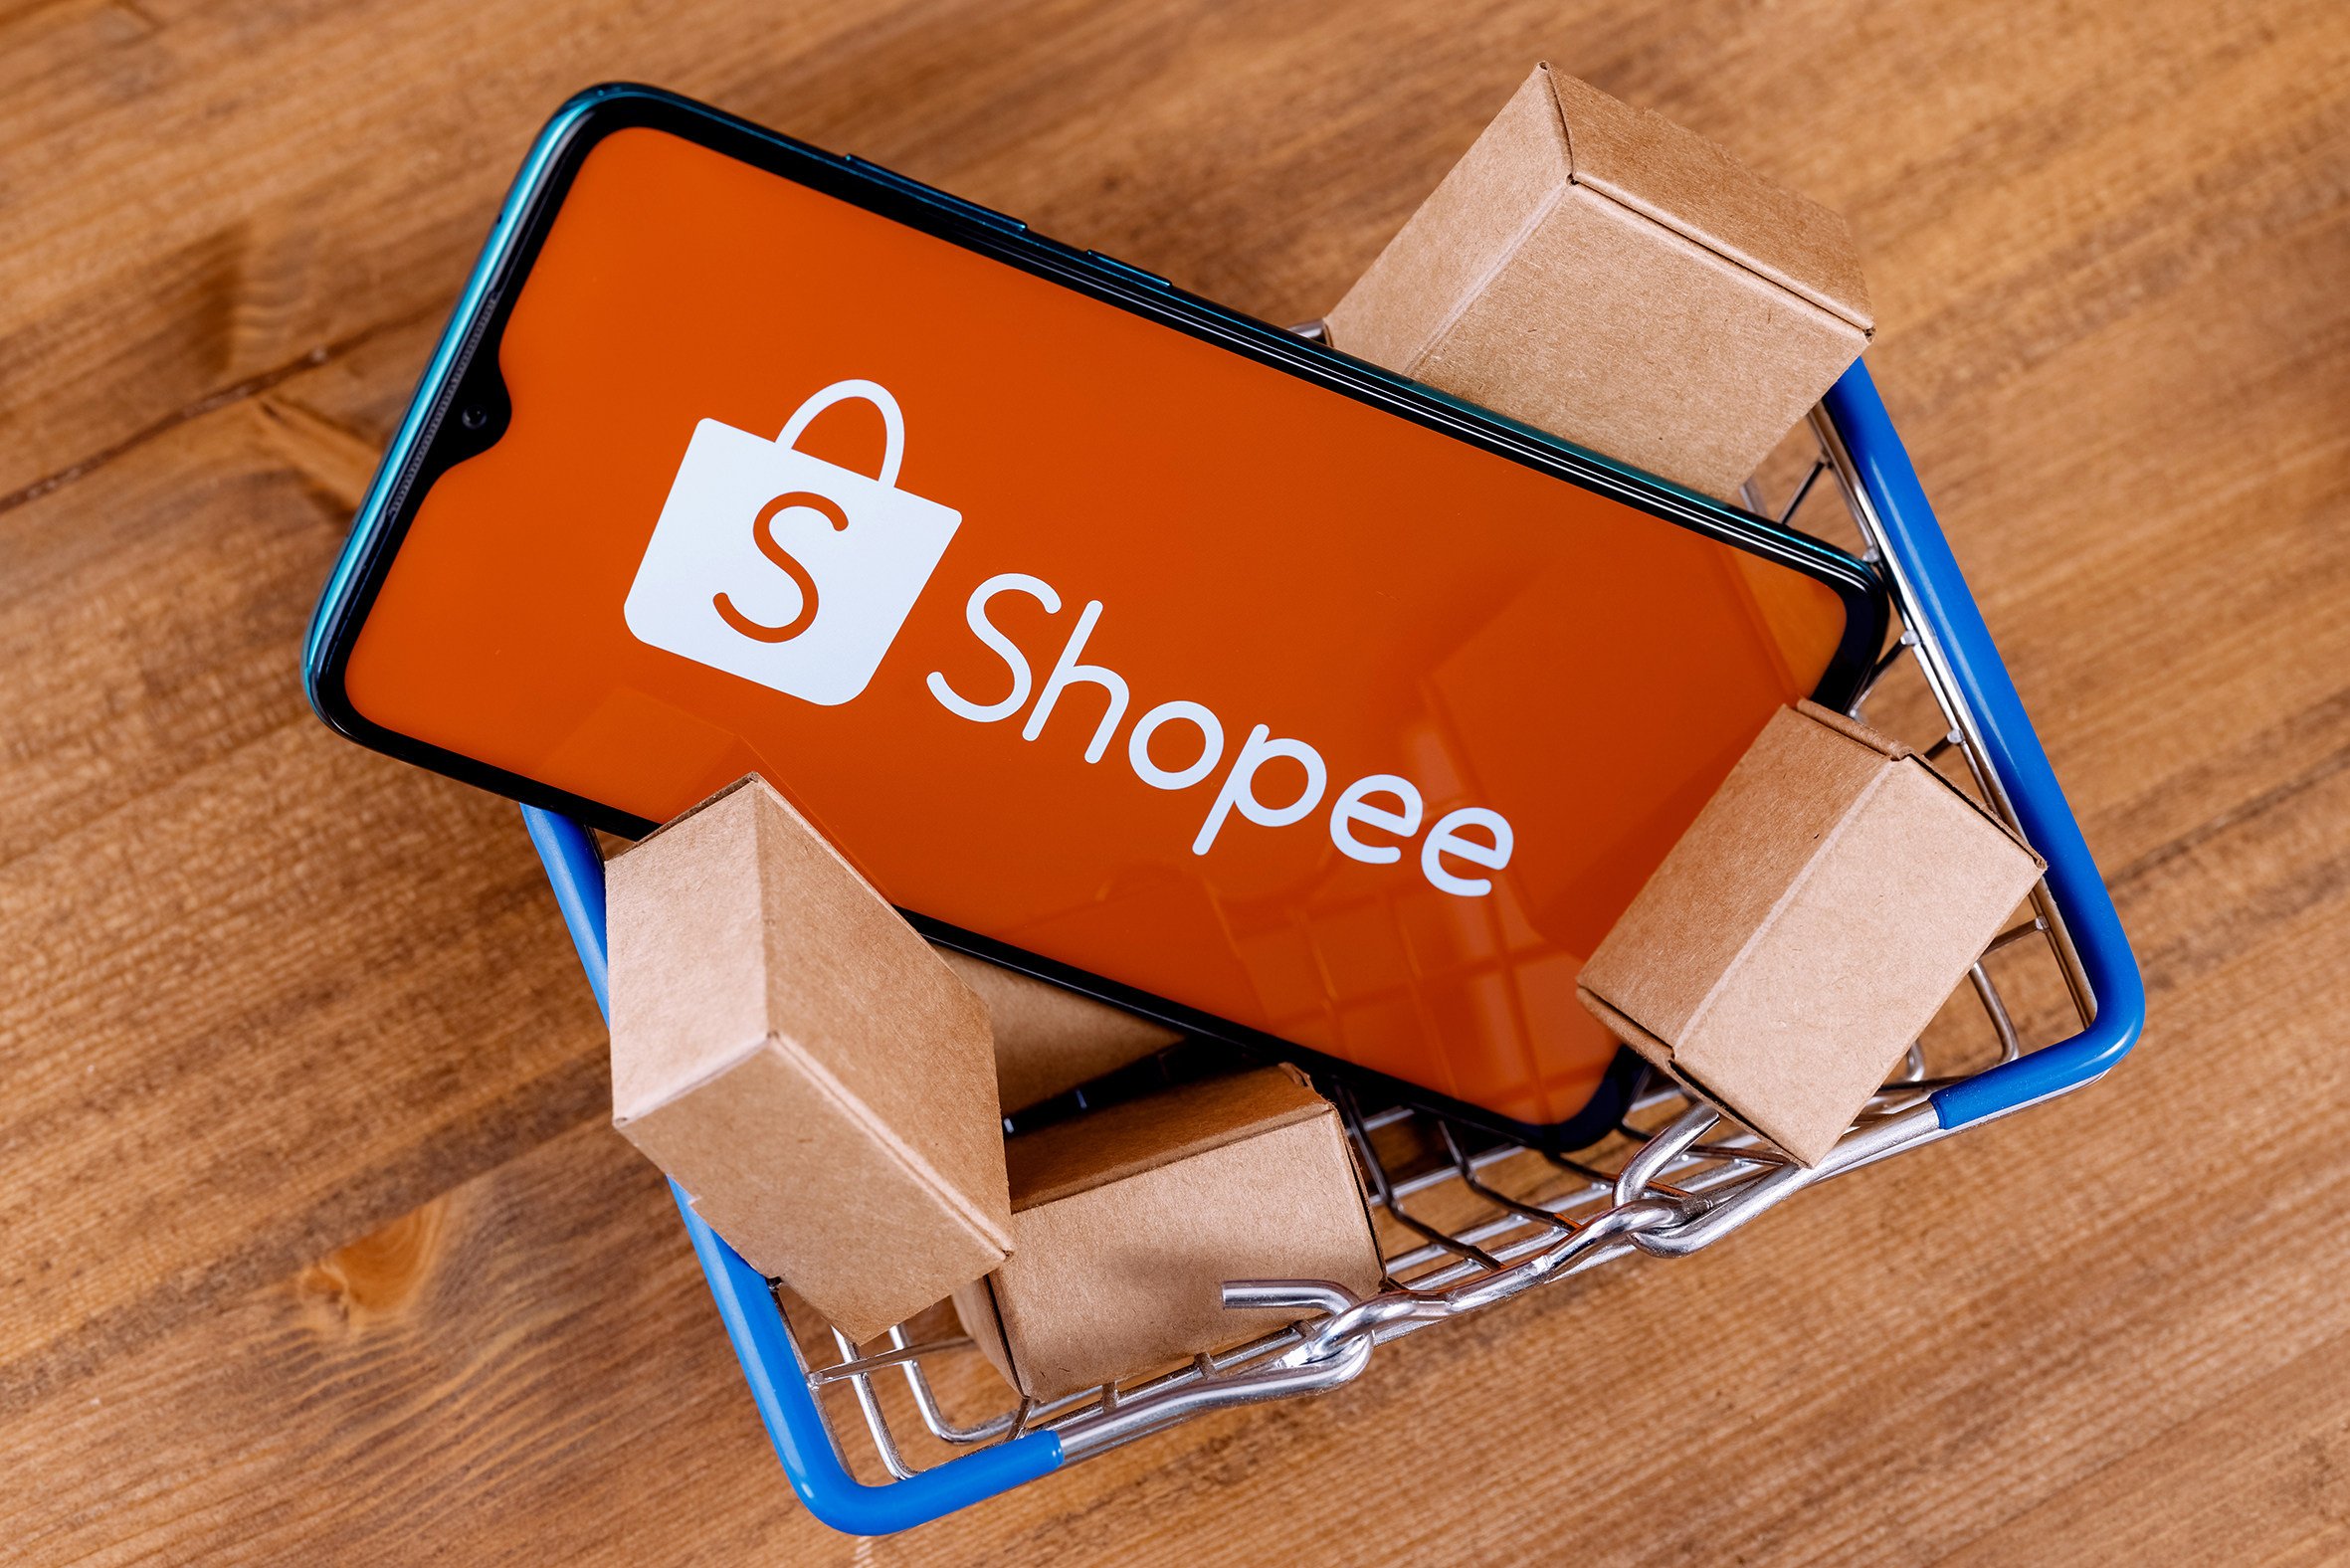 Singapore e-commerce company Shopee has joined Amazon, Lazada and Qoo10 at the top of the city state’s anti-scam rankings. Photo: Shutterstock